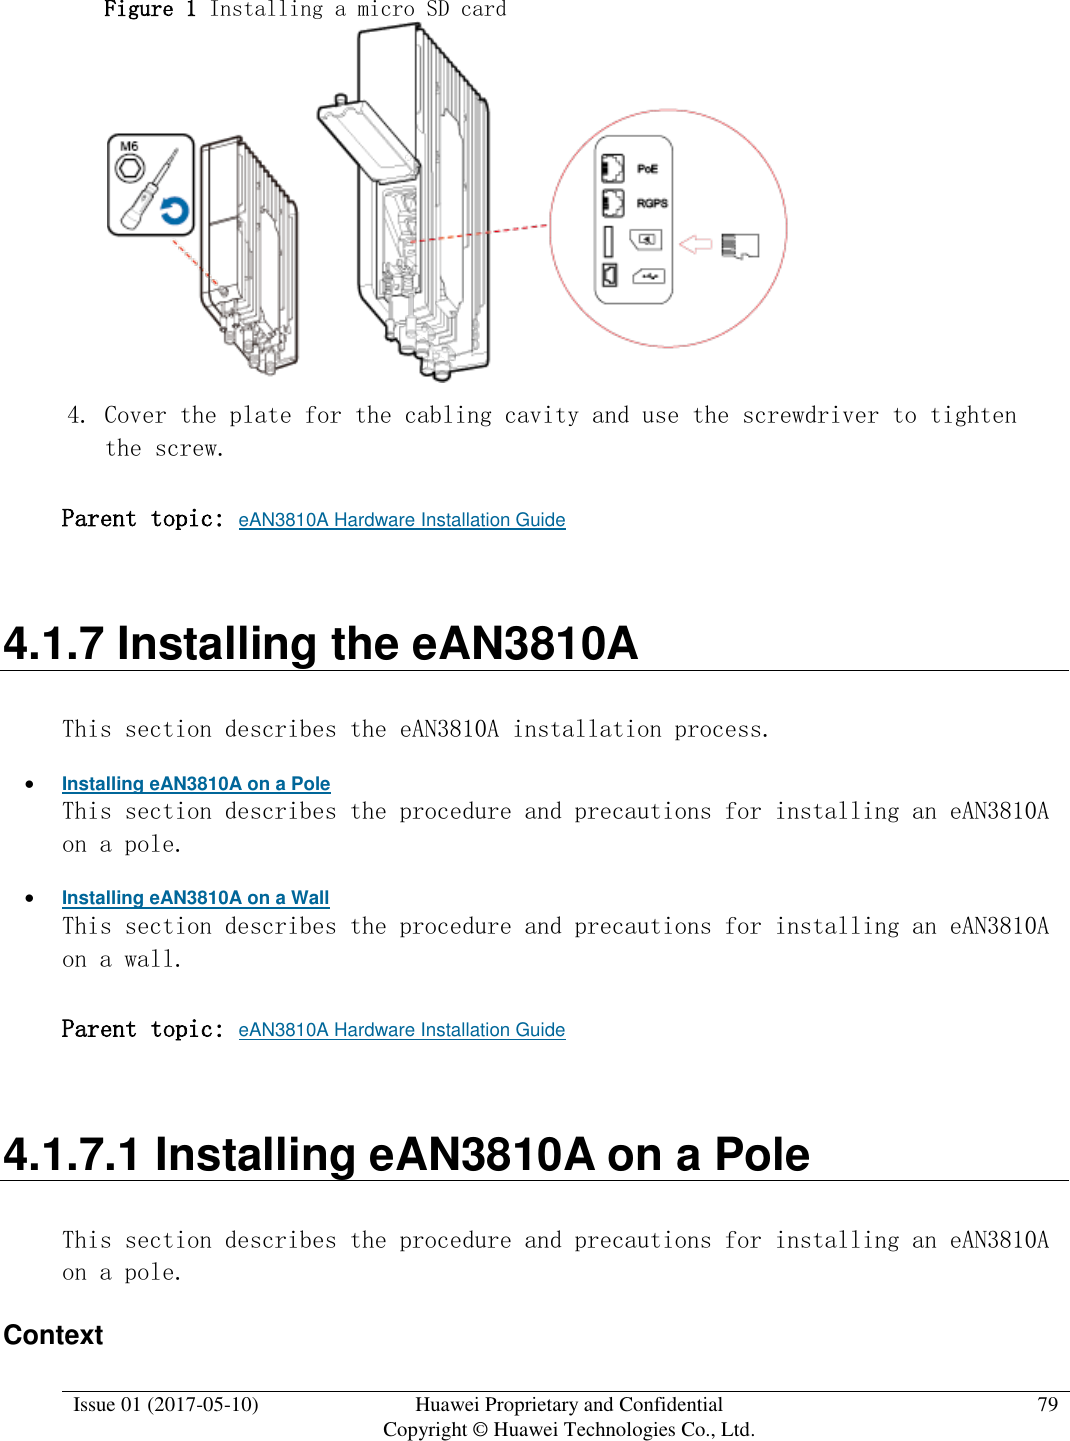  Issue 01 (2017-05-10) Huawei Proprietary and Confidential      Copyright © Huawei Technologies Co., Ltd. 79  Figure 1 Installing a micro SD card   4. Cover the plate for the cabling cavity and use the screwdriver to tighten the screw. Parent topic: eAN3810A Hardware Installation Guide 4.1.7 Installing the eAN3810A This section describes the eAN3810A installation process.  Installing eAN3810A on a Pole This section describes the procedure and precautions for installing an eAN3810A on a pole.  Installing eAN3810A on a Wall This section describes the procedure and precautions for installing an eAN3810A on a wall. Parent topic: eAN3810A Hardware Installation Guide 4.1.7.1 Installing eAN3810A on a Pole This section describes the procedure and precautions for installing an eAN3810A on a pole. Context 